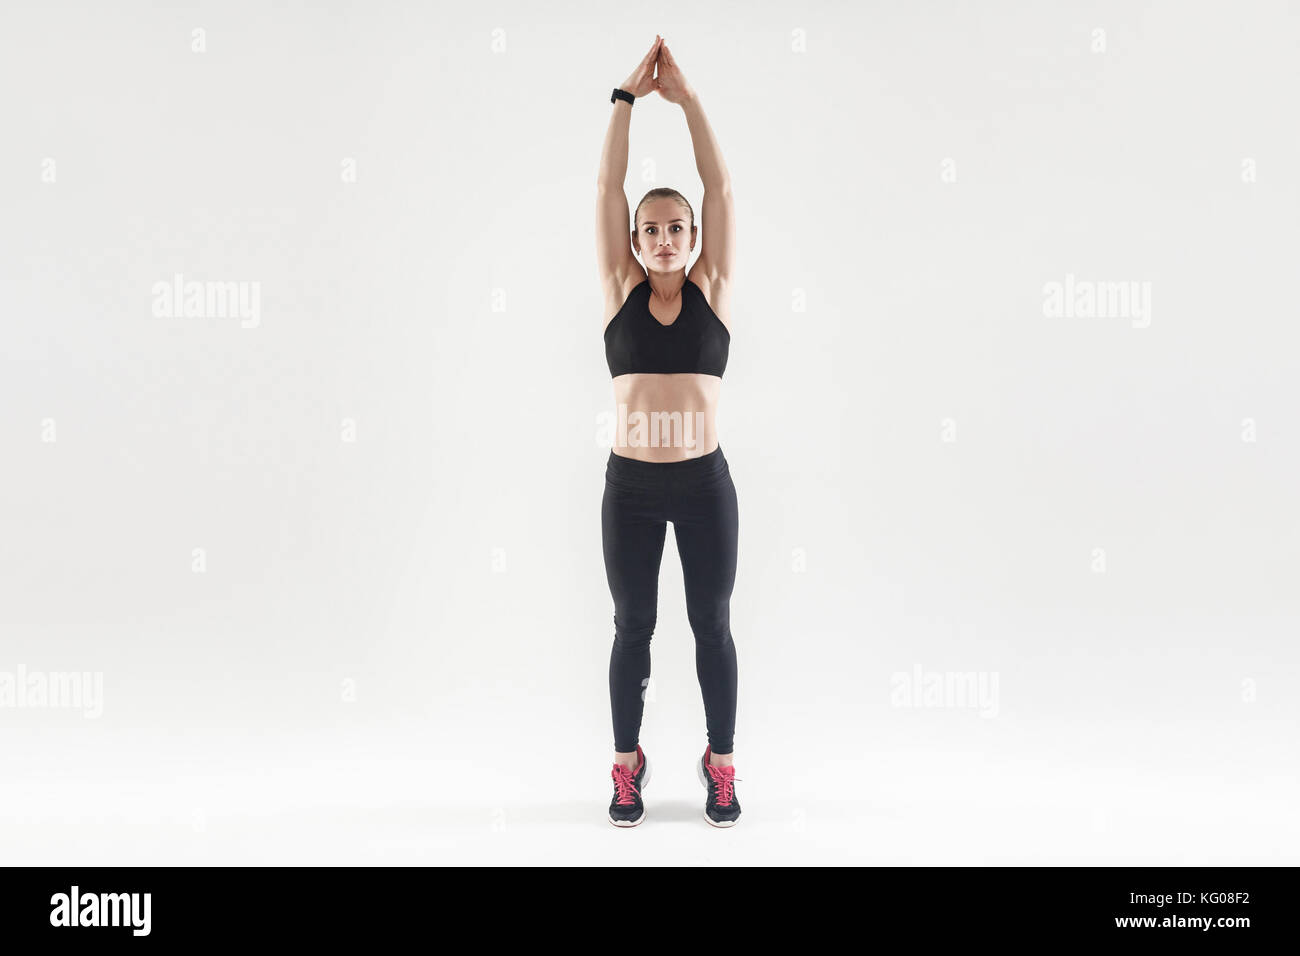 Easy aerobic exercising. Hands up and toe standing. Beautiful blonde woman. Studio shot, isolated on gray background Stock Photo